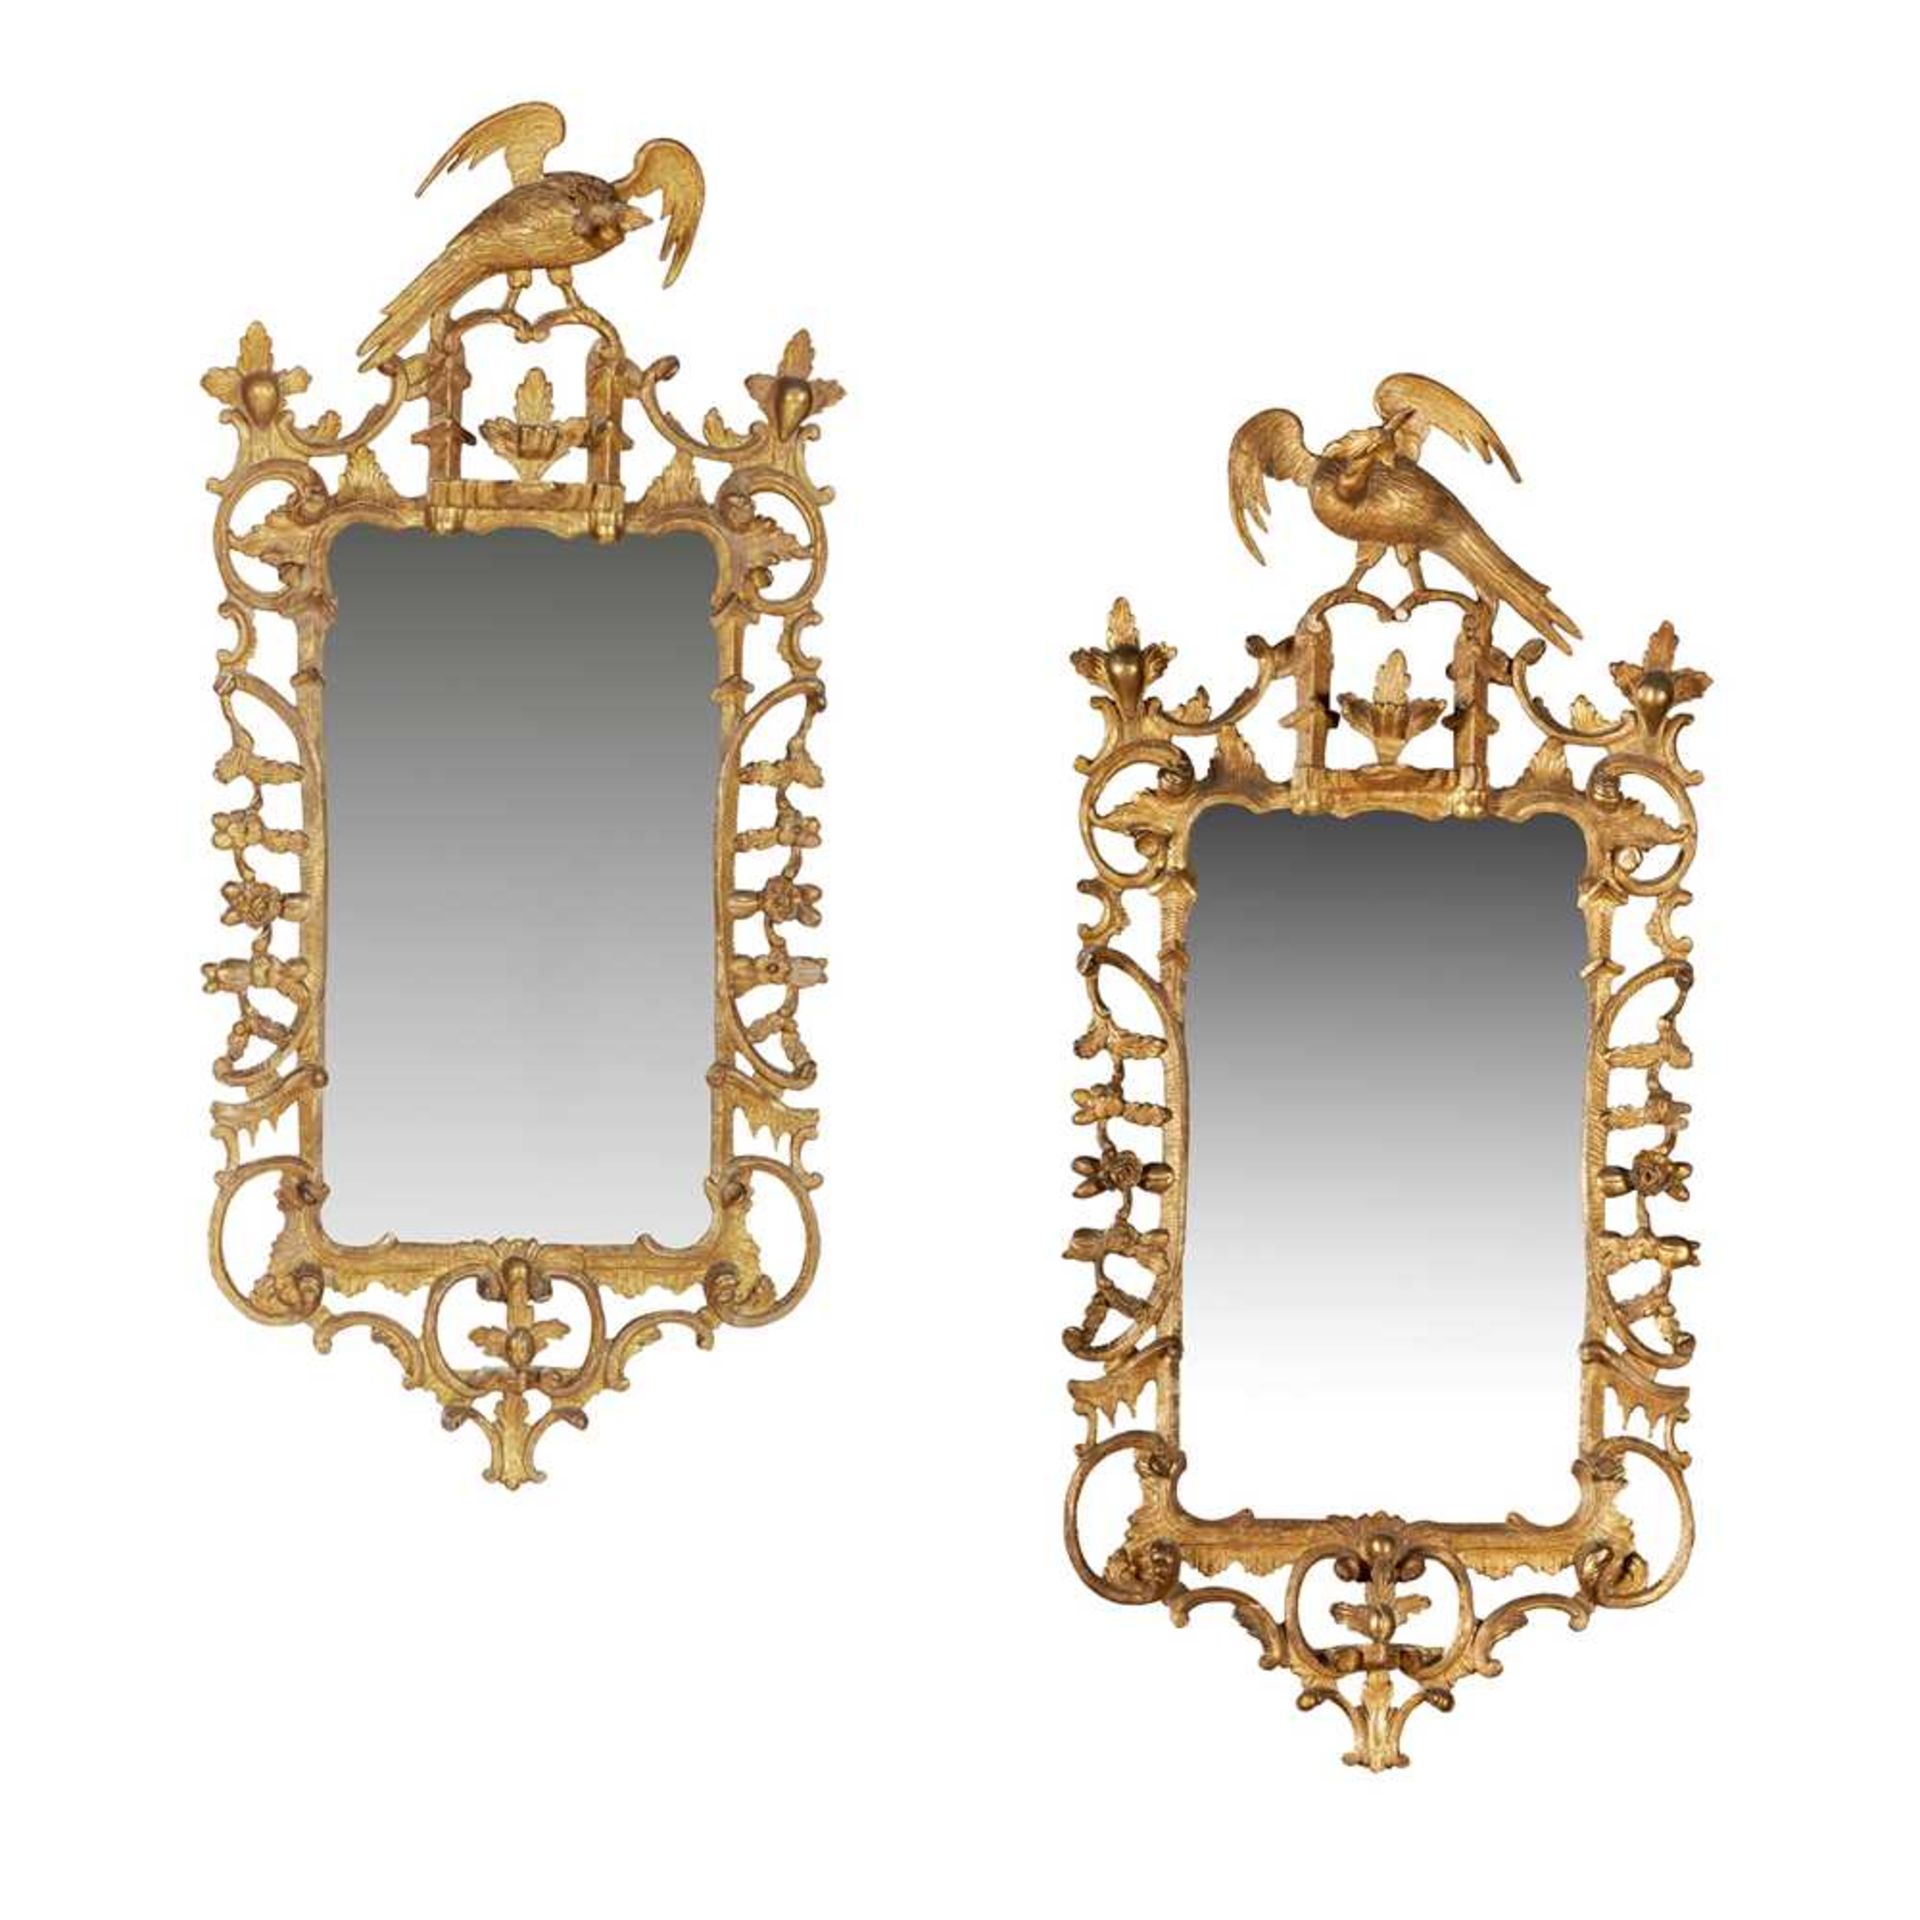 PAIR OF GEORGE III STYLE GILTWOOD MIRRORS, IN THE MANNER OF THOMAS CHIPPENDALE 19TH CENTURY